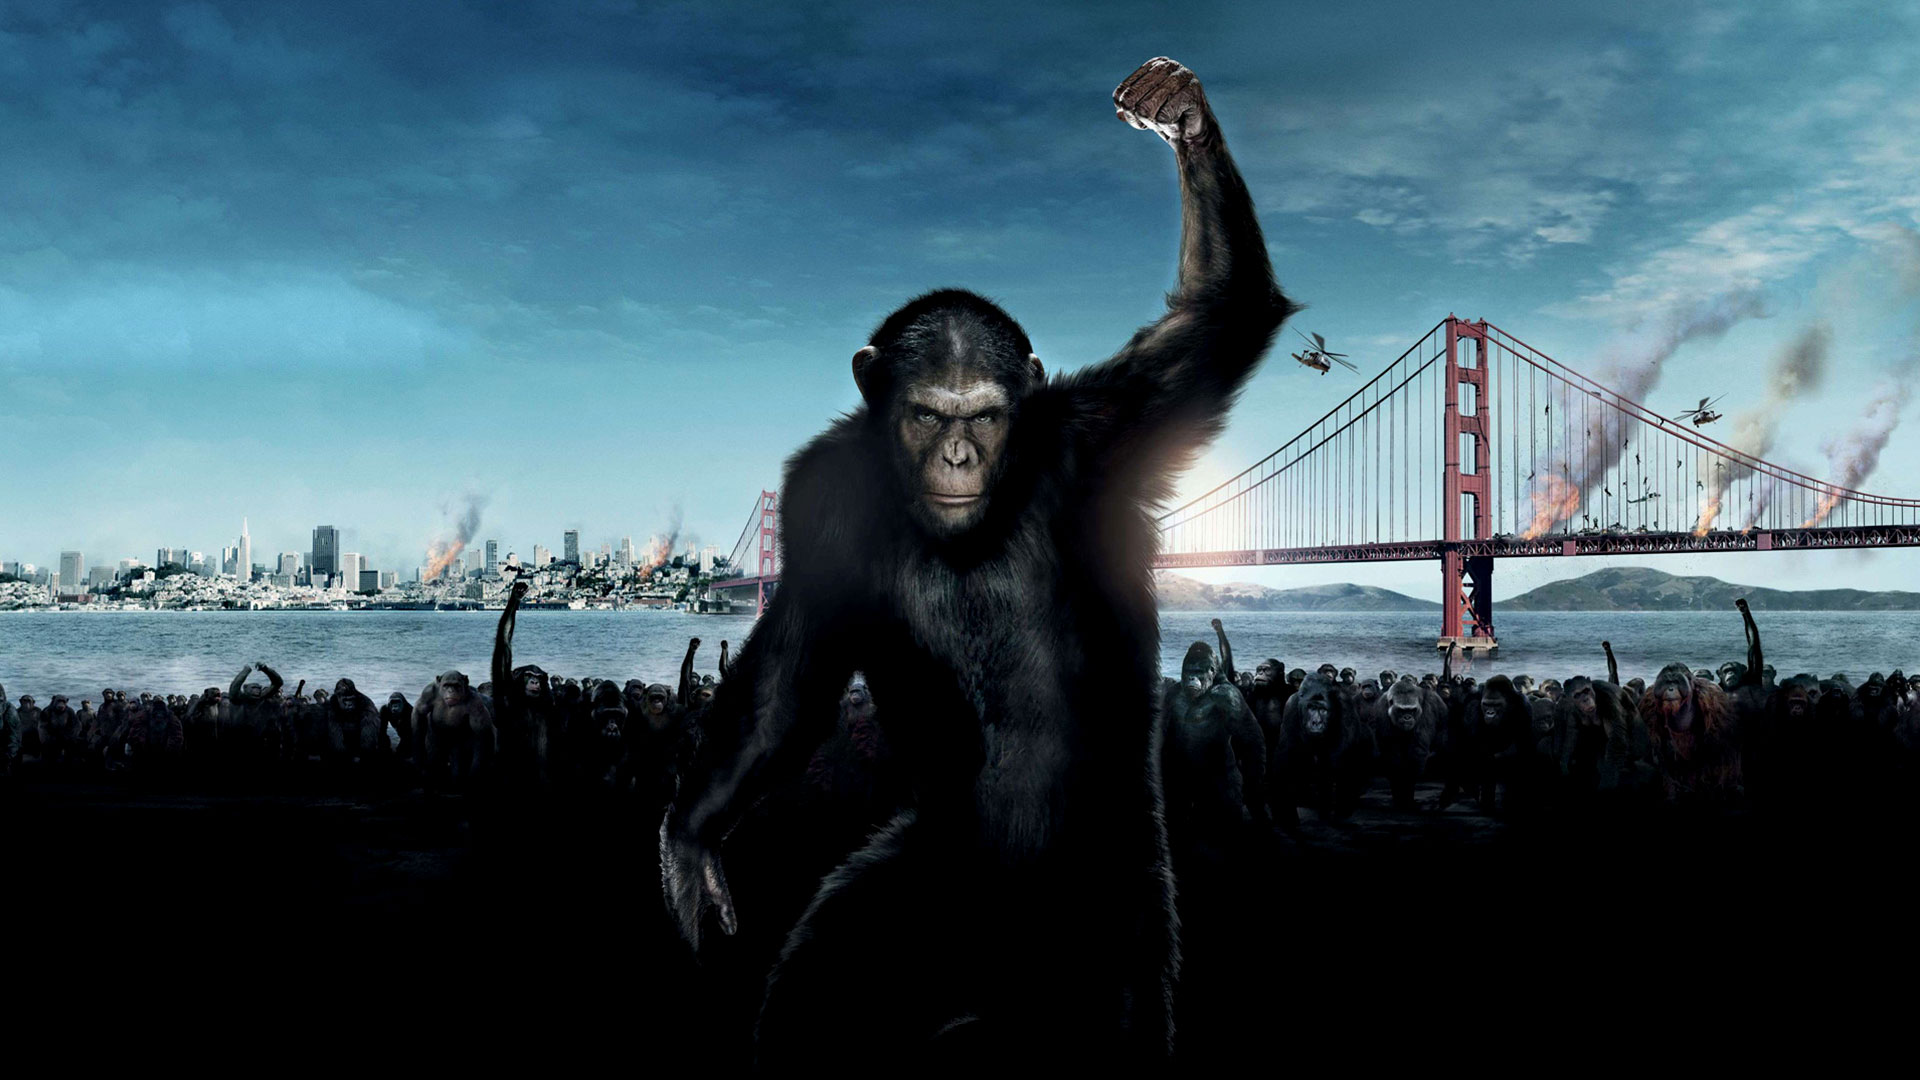 rise of the planet of the apes, movie